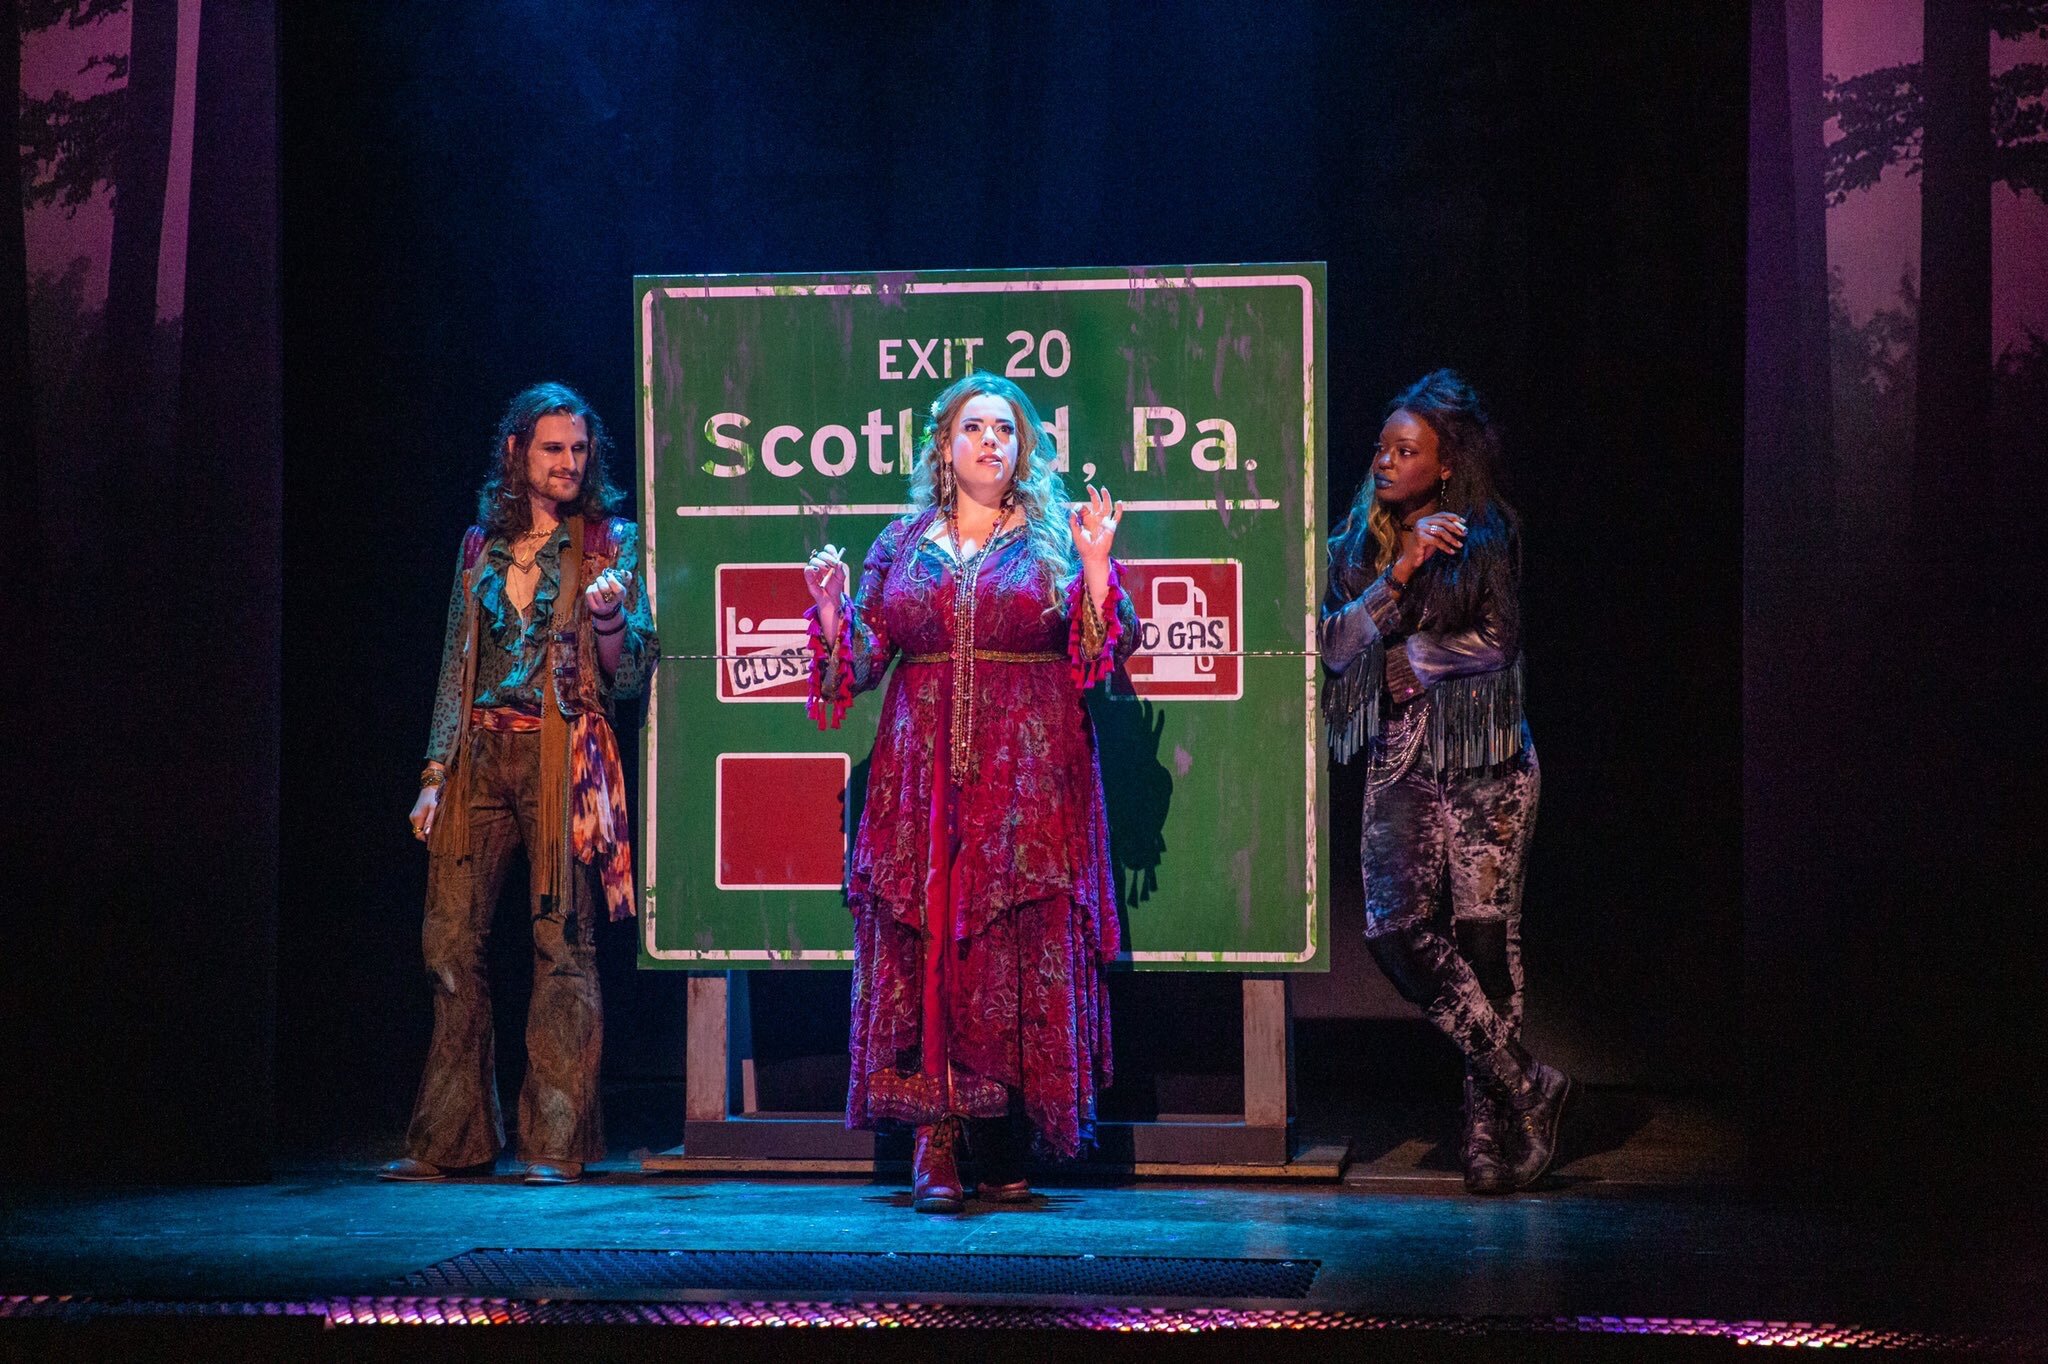 Scotland, PA with the Roundabout Theatre Company